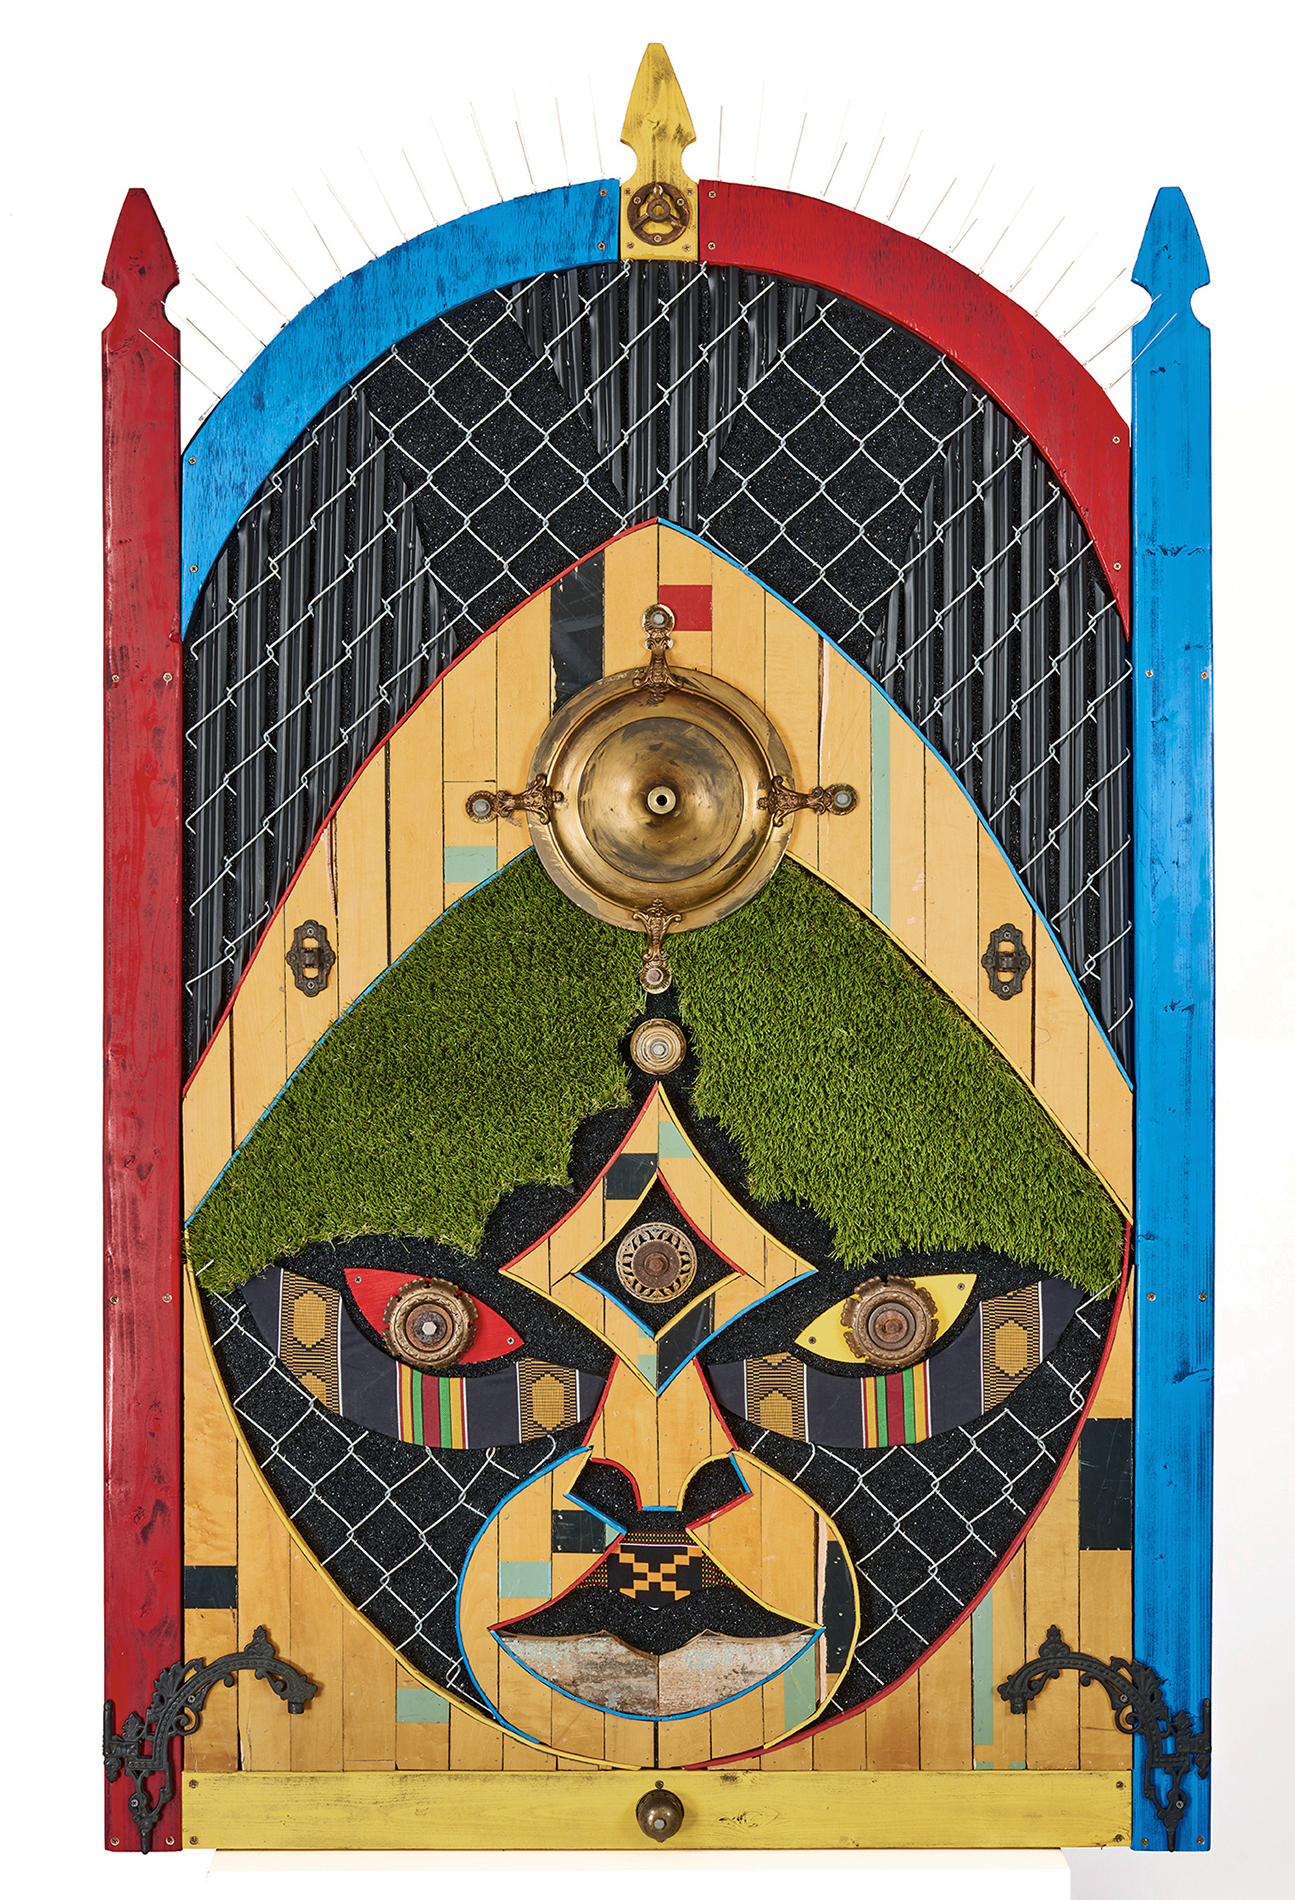 Sentinel, The Gatekeeper; by Aaron Coleman. A mixed media assemblage evoking Ghanaian masks, made from fencing, fake turf, and salvaged wood from a neighbor's home lost to gentrification.